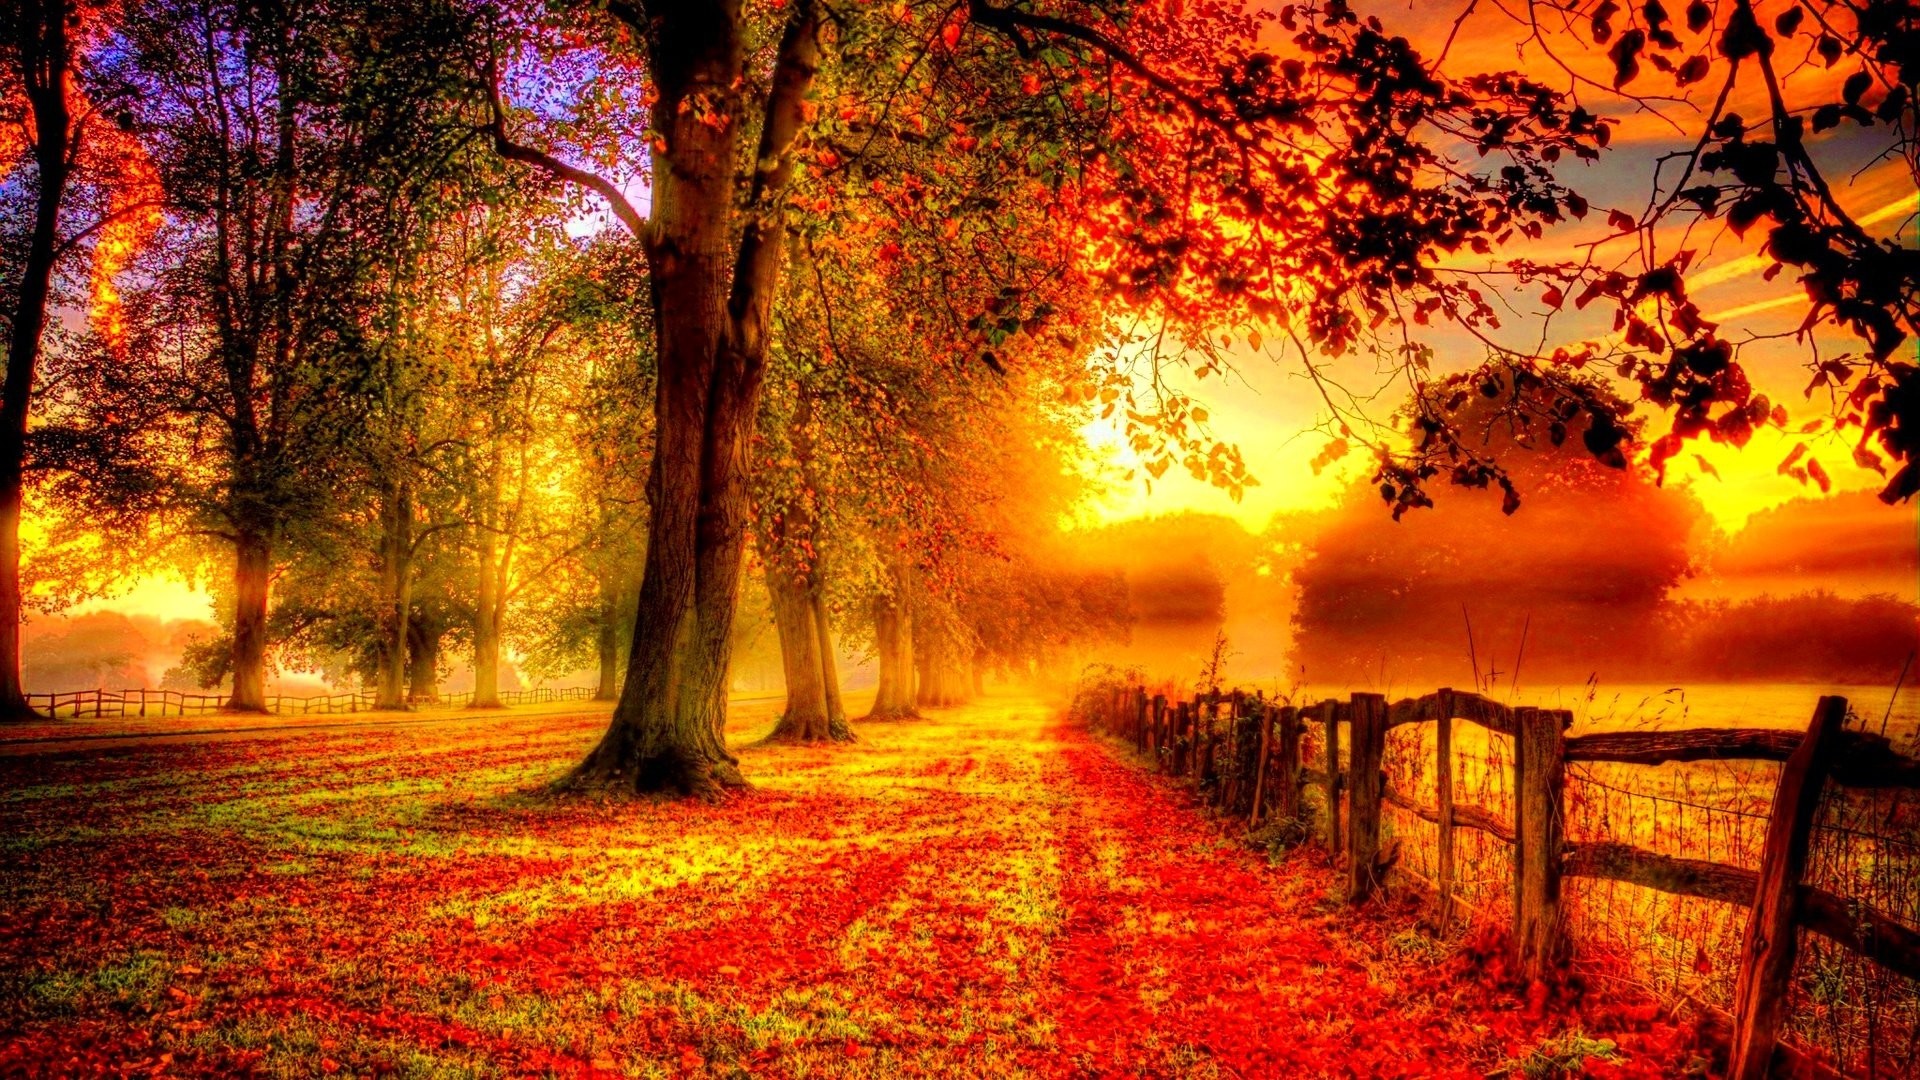 Fall nature full hd wallpapers 1920x1080 - limosample